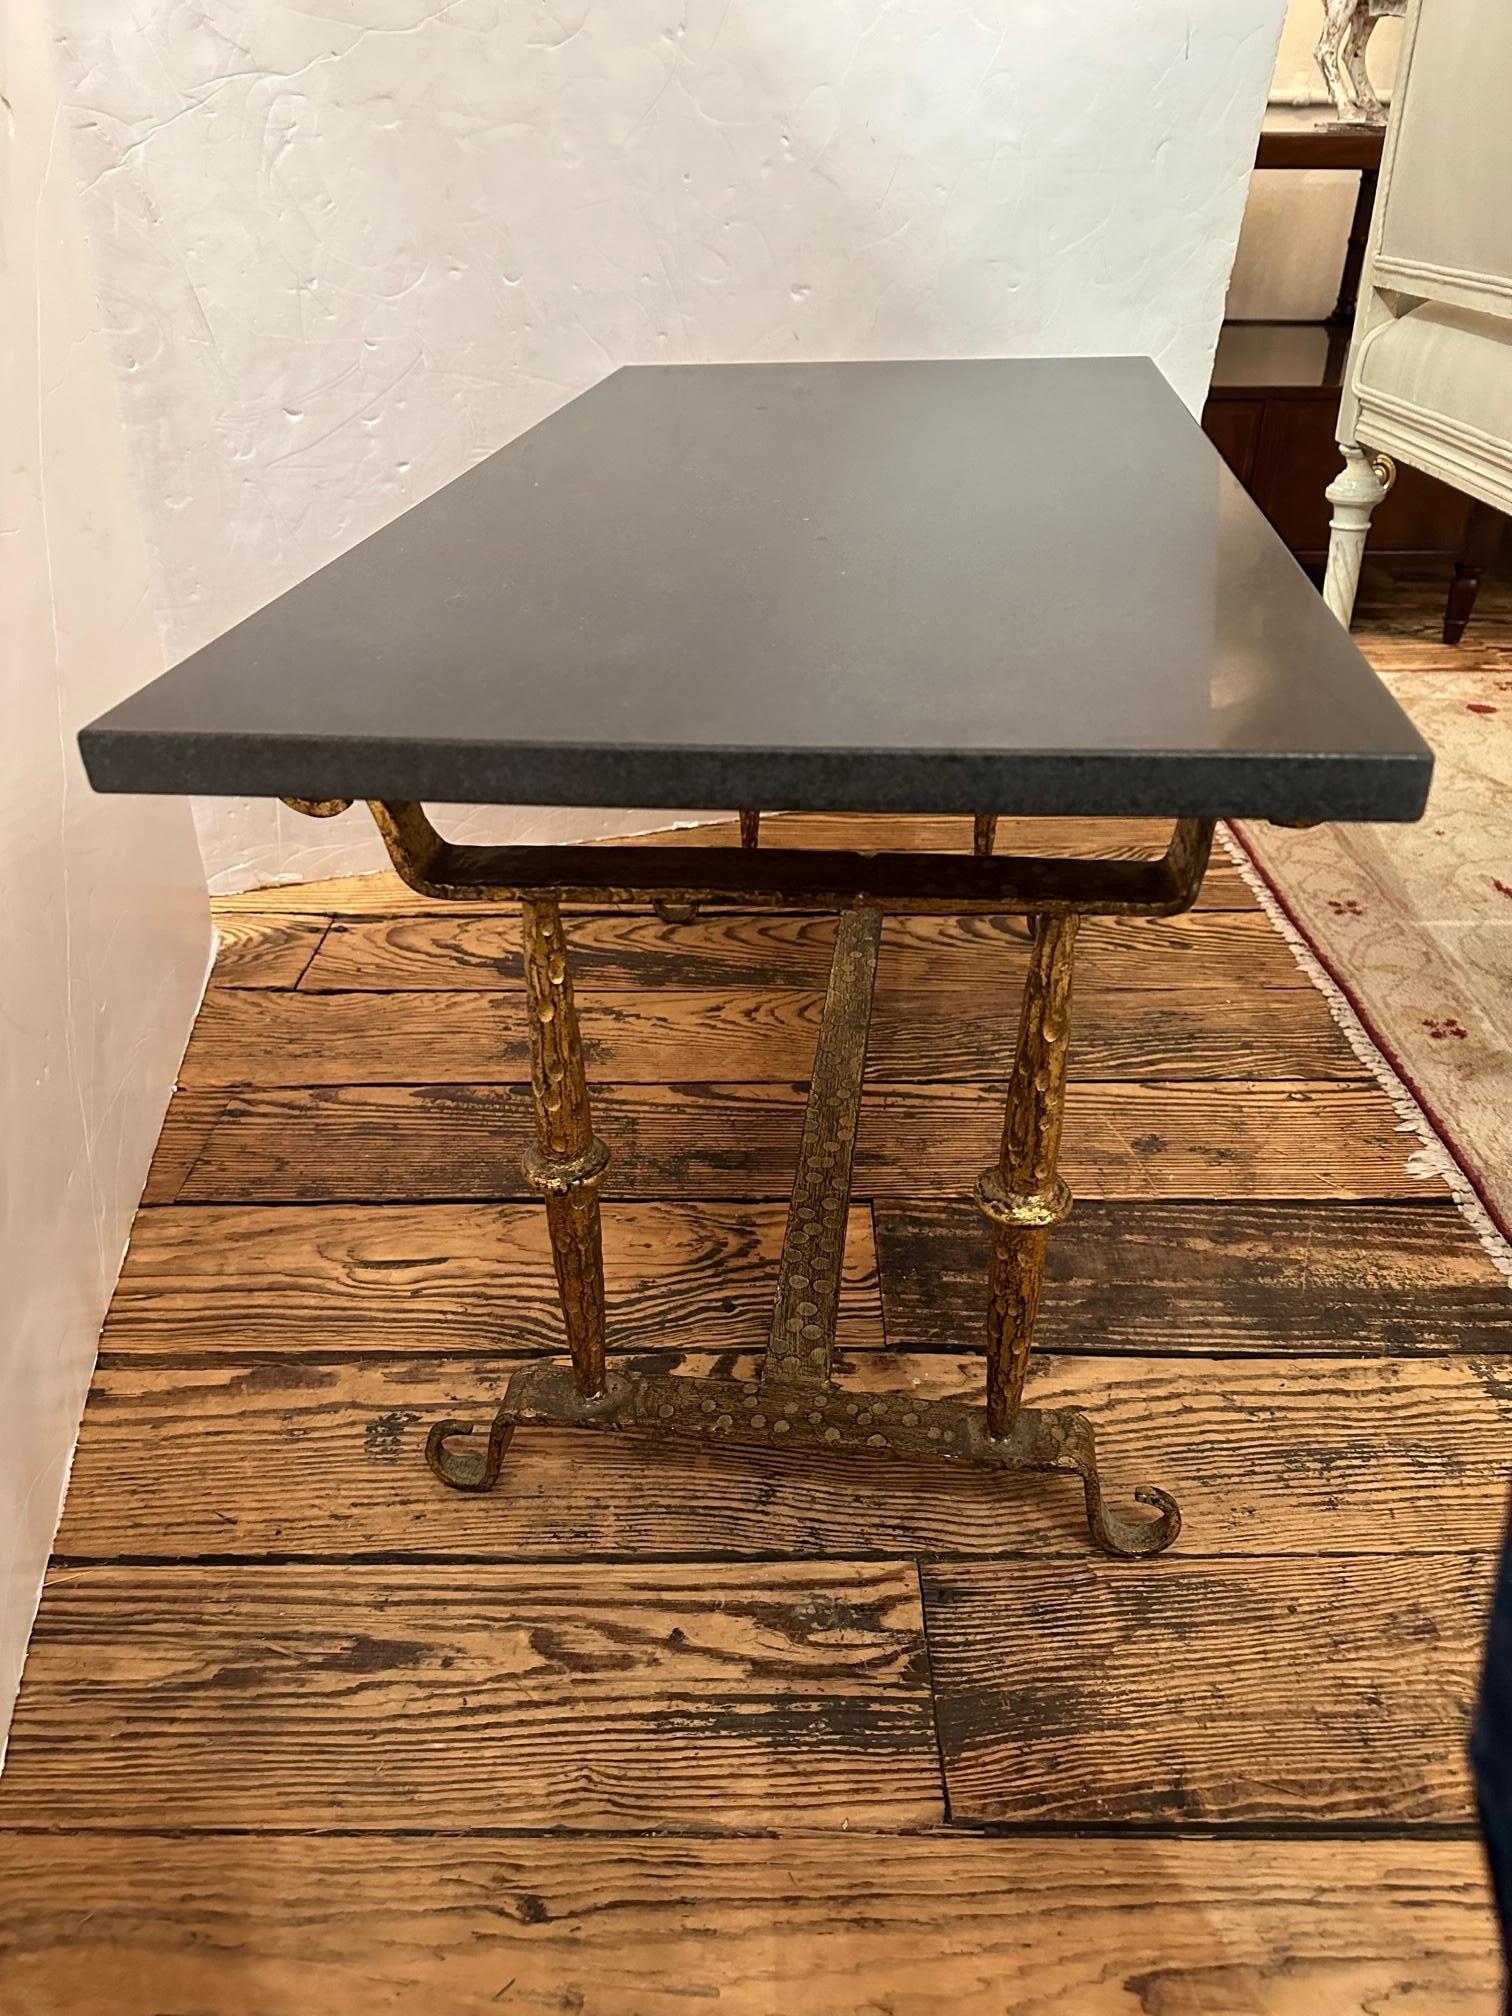 Elegant small hammered gilt iron cocktail table with black marble rectangular top.